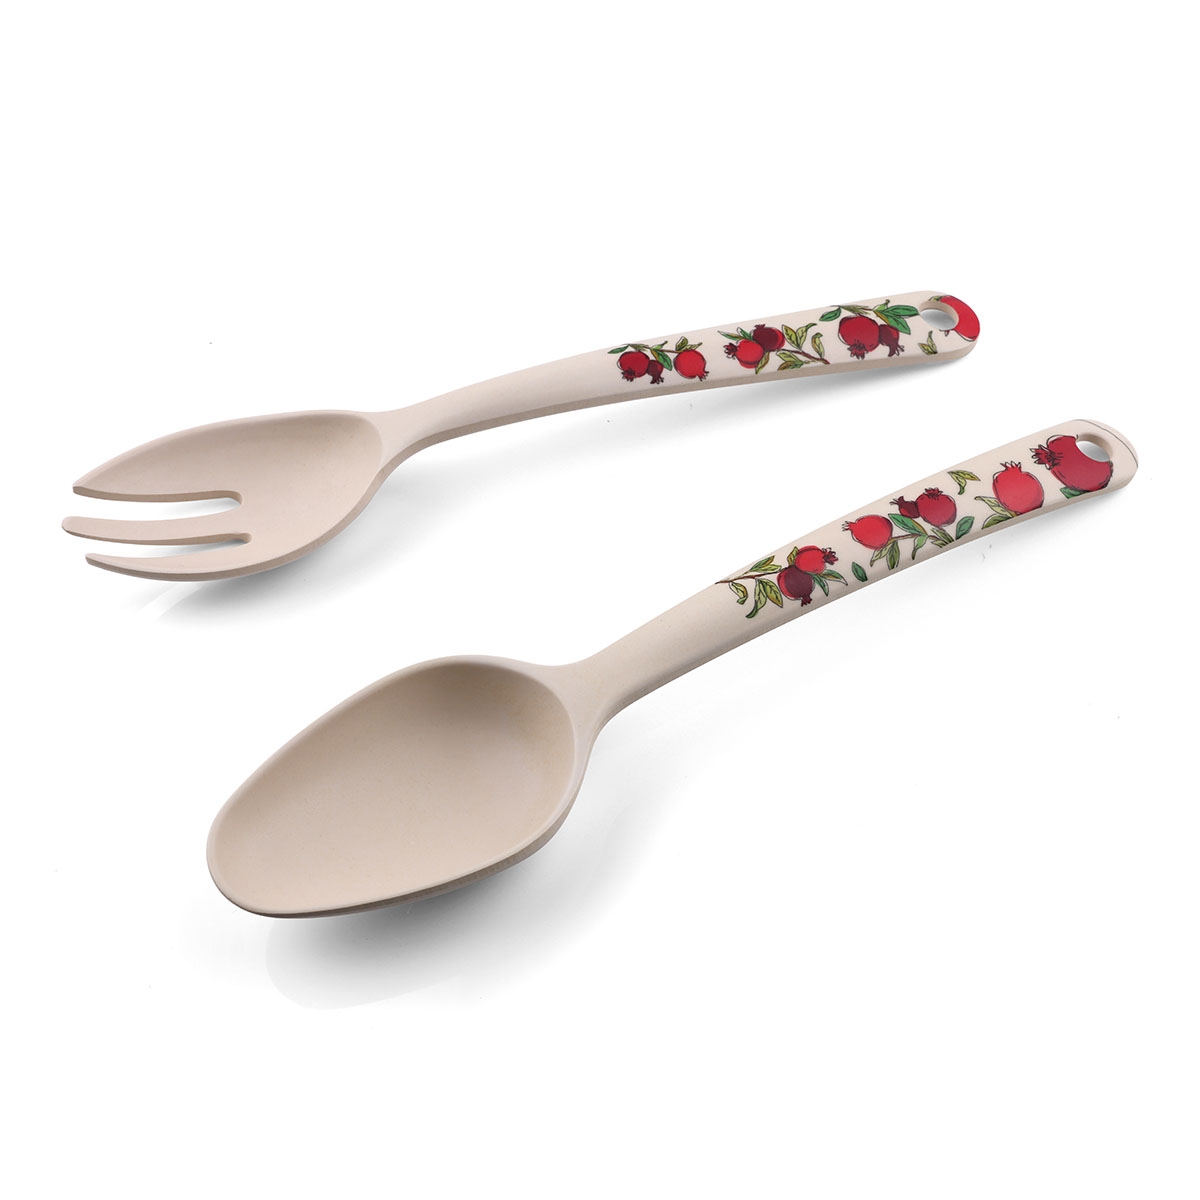 Yair Emanuel Bamboo Pomegranate Serving Spoon Set (2 Pieces) - 1